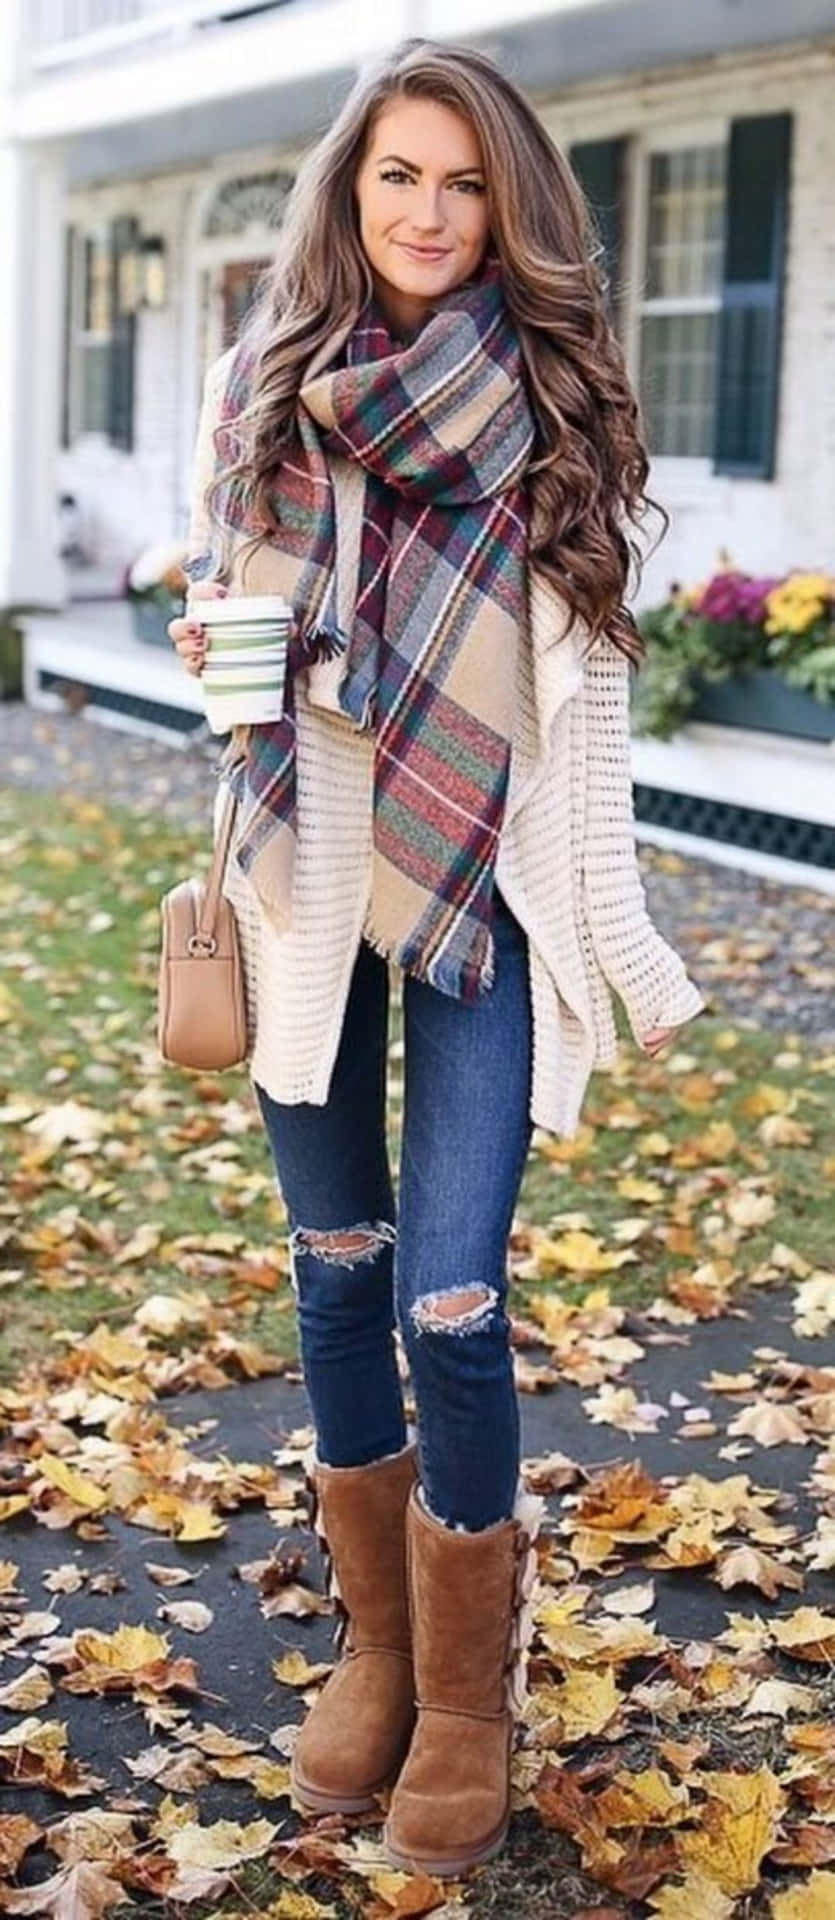 Embrace the colors of fall and enjoy the fall aesthetic!